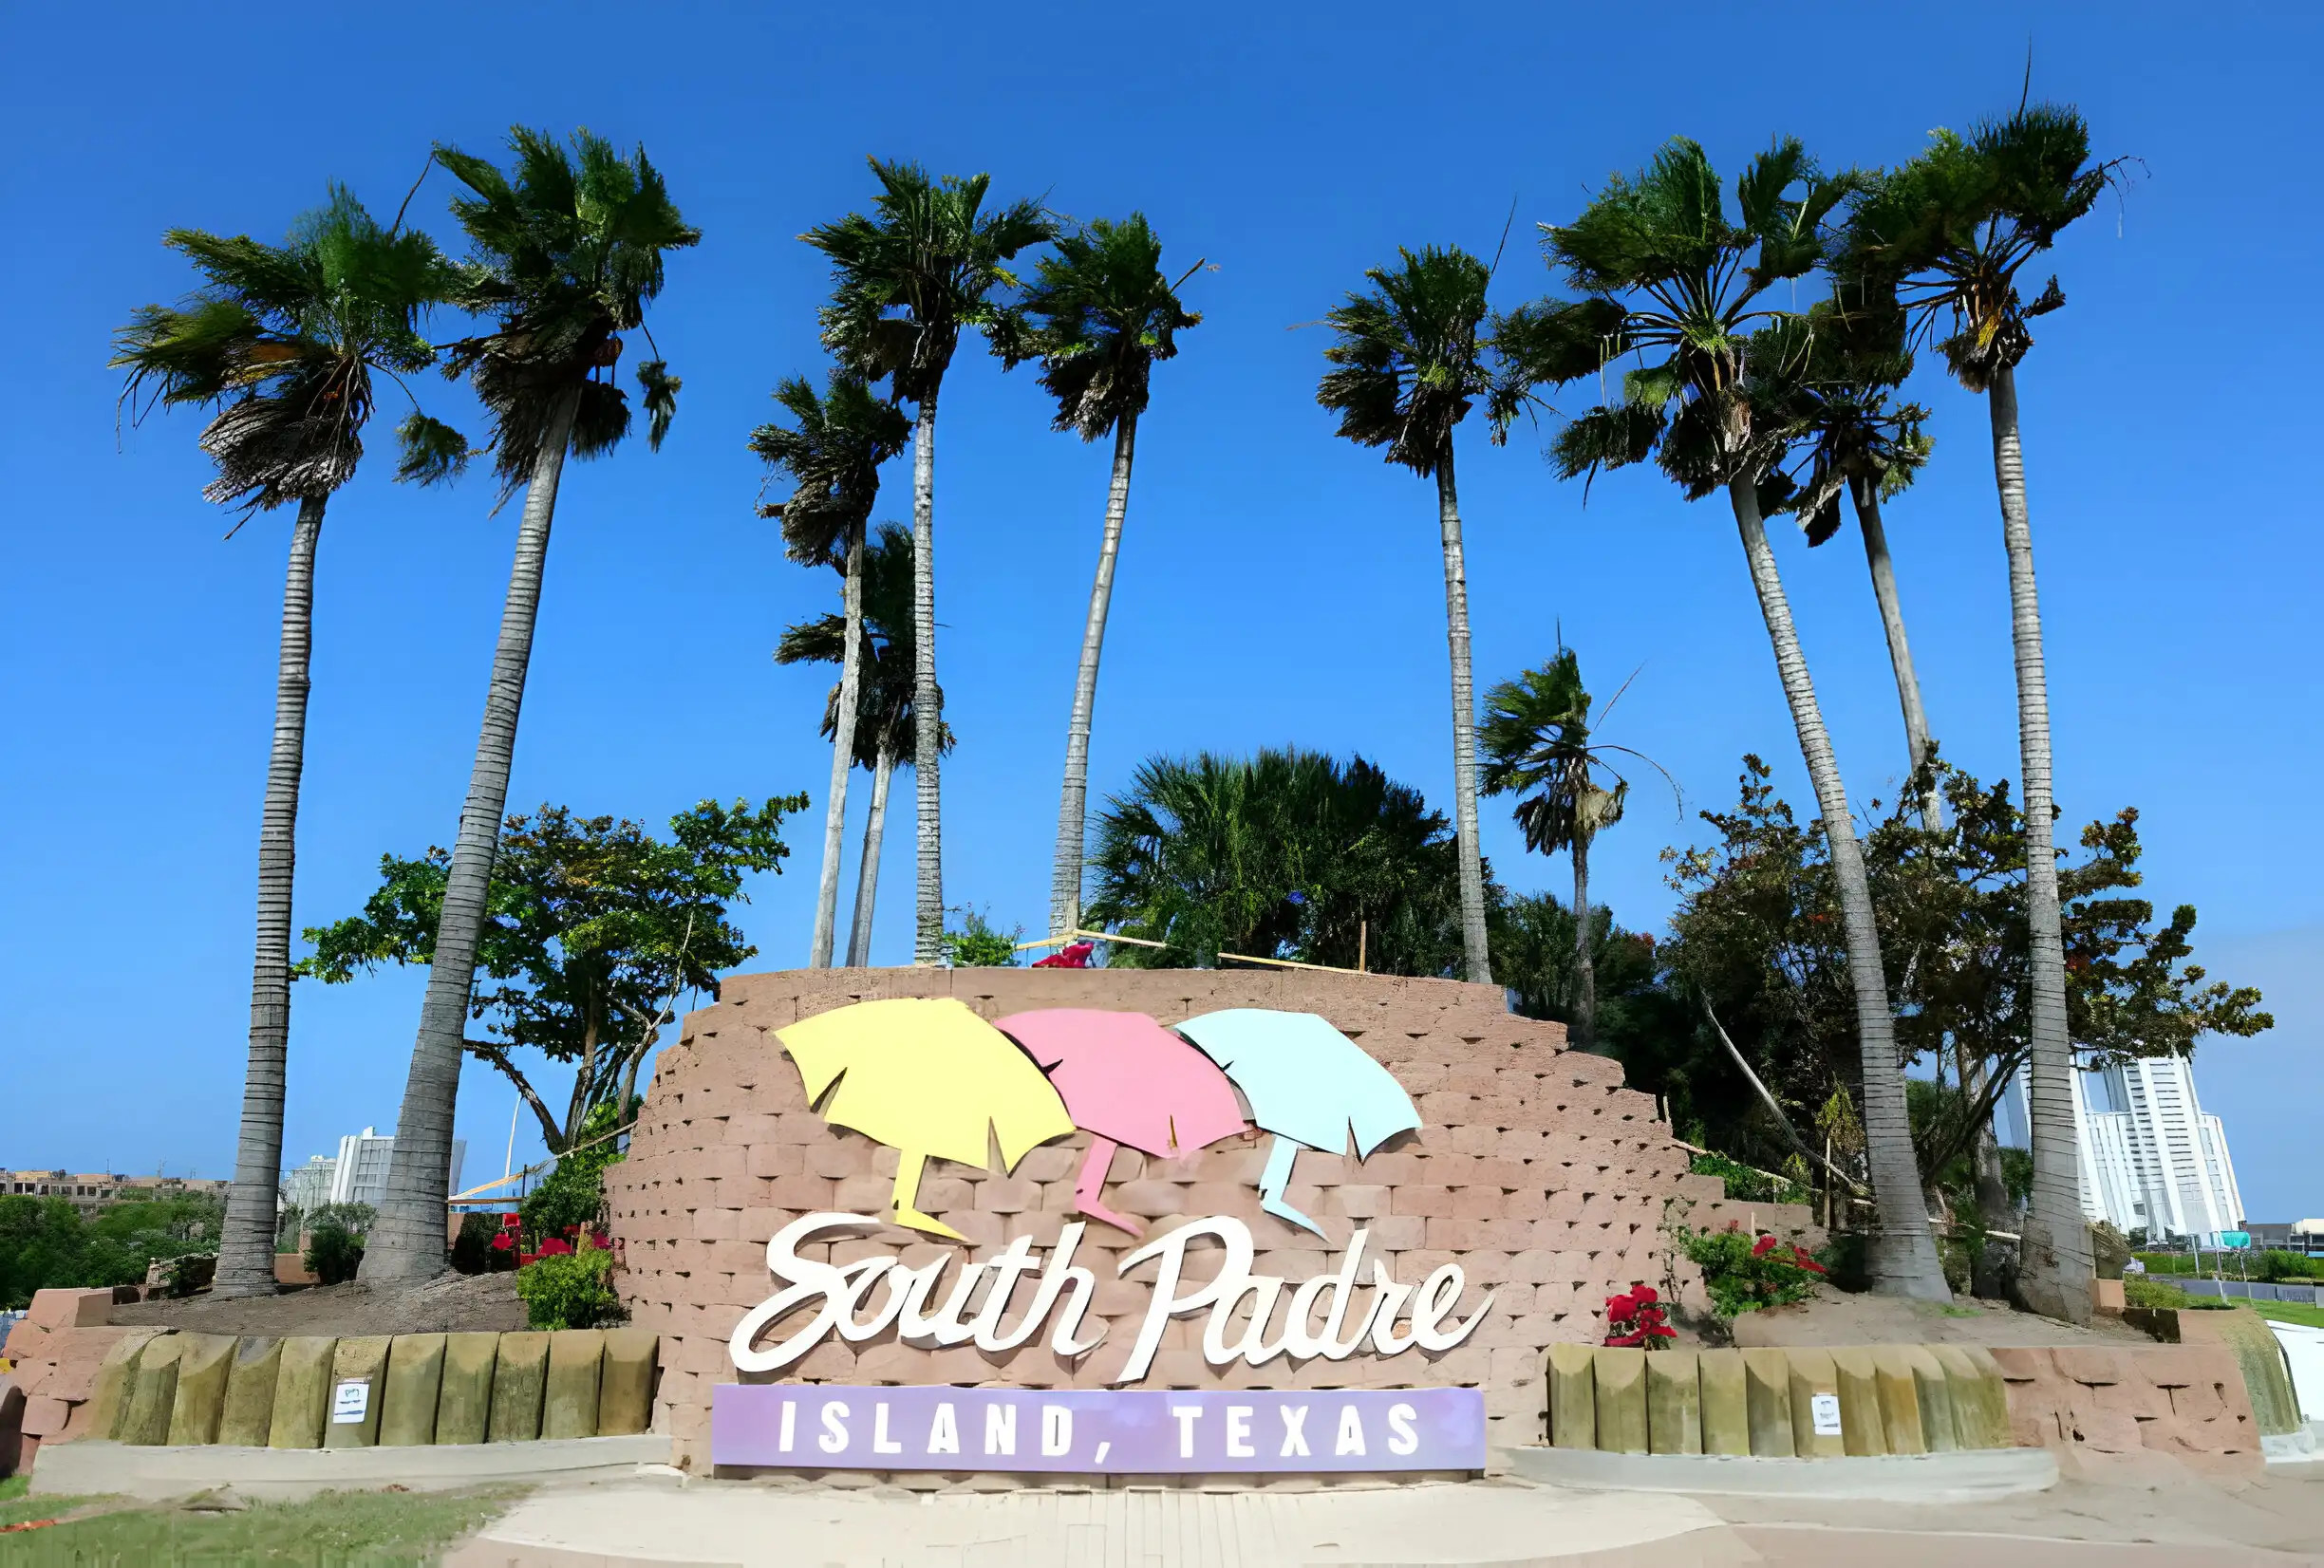 Can You Drive to South Padre Island?